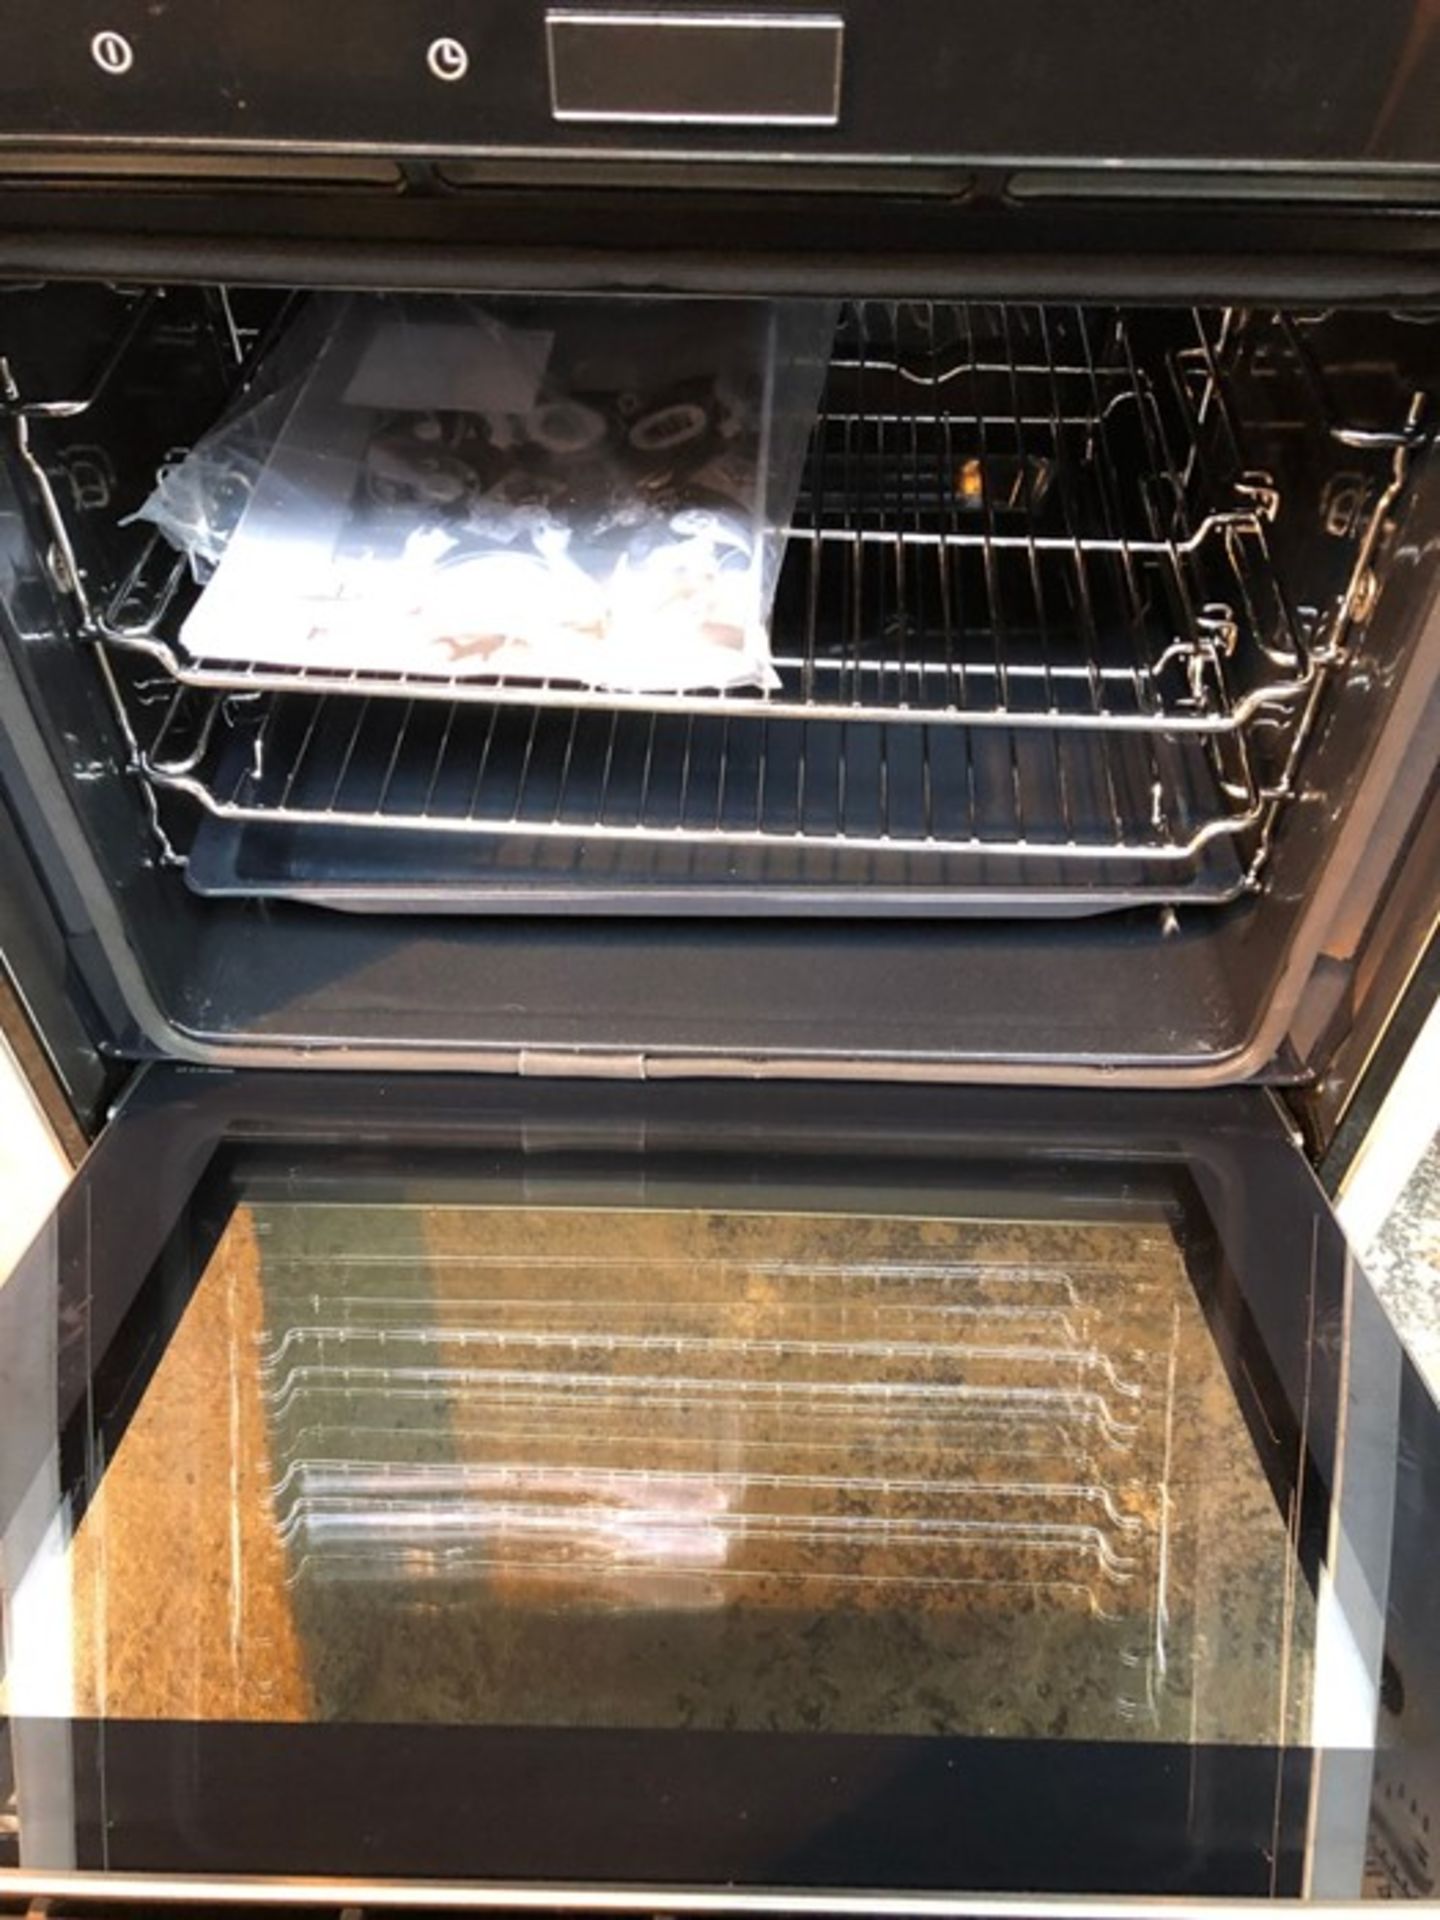 NEFF B57CR22N0B PYROLYTIC SLIDE AND HIDE SINGLE ELECTRIC OVEN - Image 2 of 2